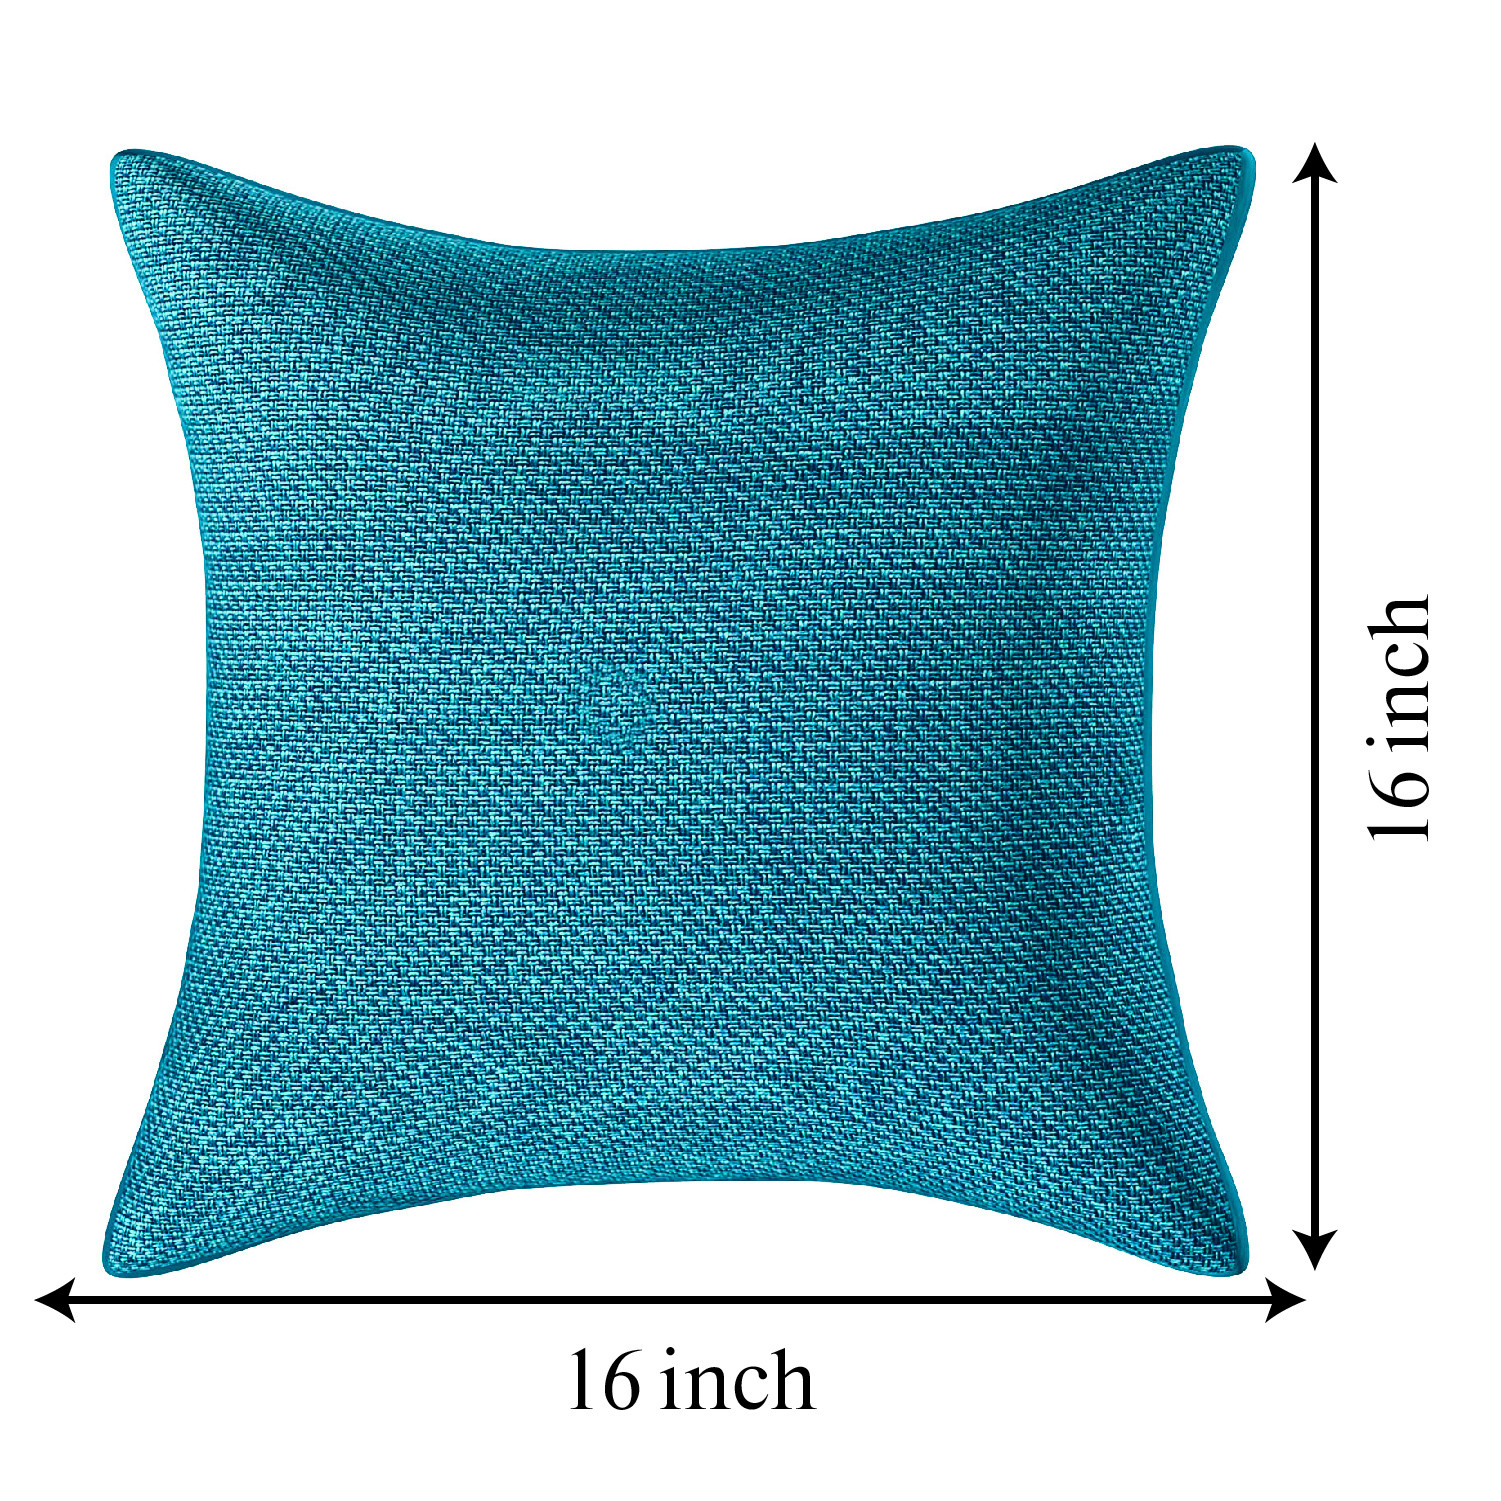 Kuber Industries Jute Cotton Decorative Square Cushion Cover, Cushion Case For Sofa Couch Bed 16x16 Inch-(Blue)